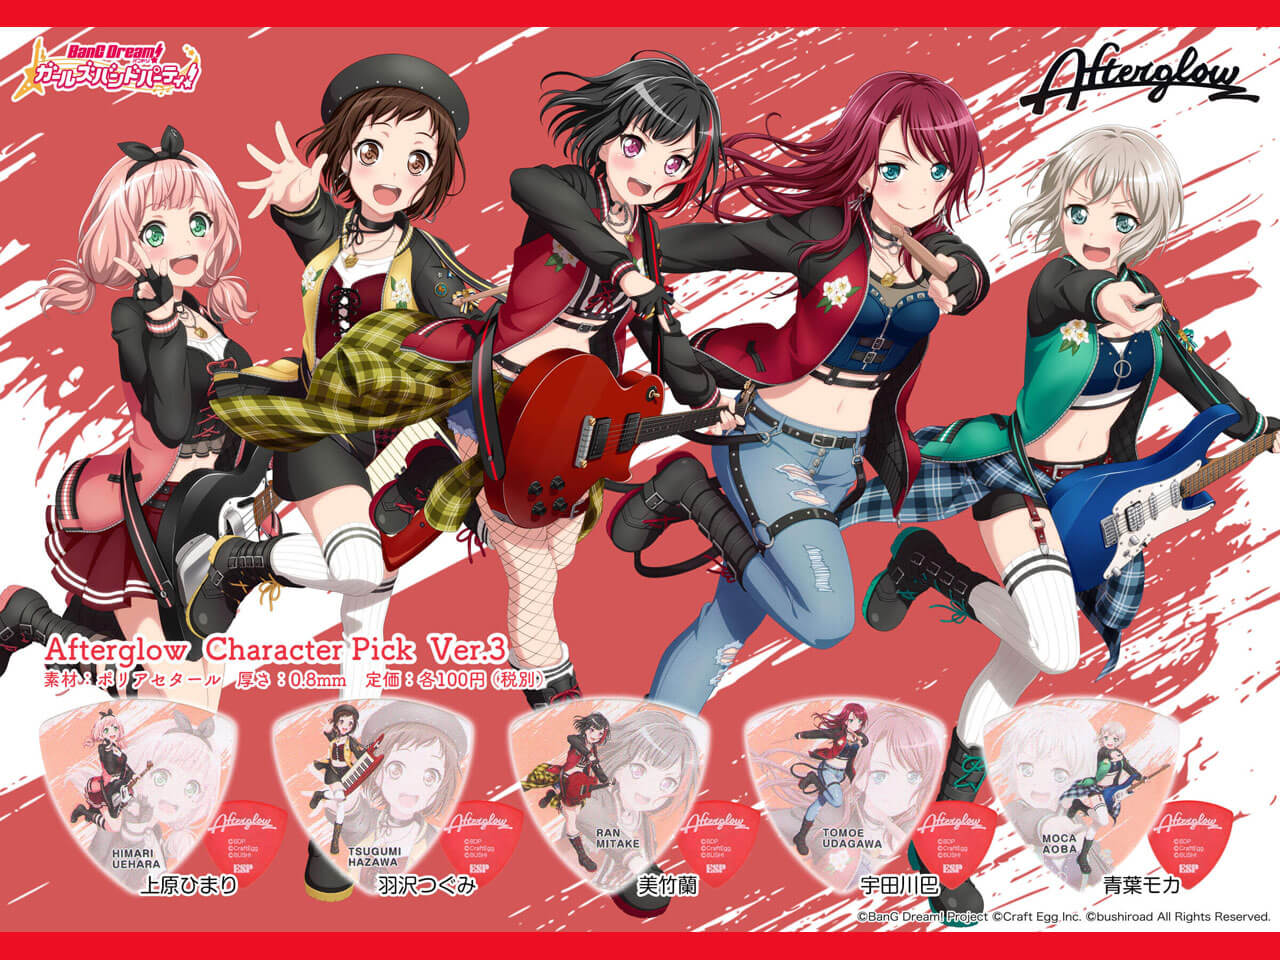 【ESP×BanG Dream!コラボピック】Afterglow Character Pick Ver.3 "宇田川巴"（GBP TOMOE AFTERGLOW 3）＆”ハメパチ” セット